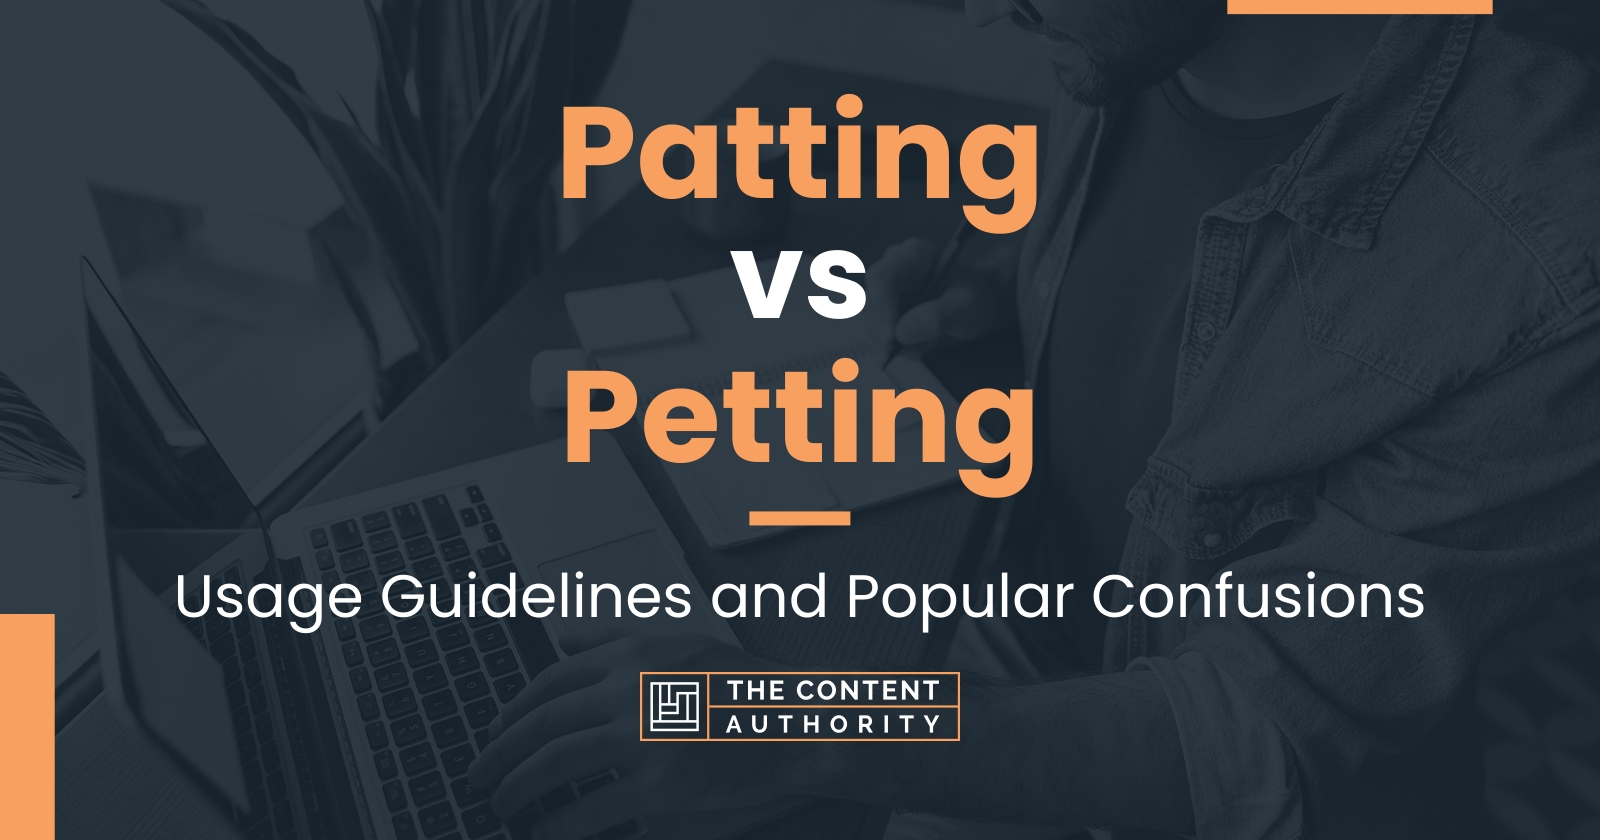 Patting vs Petting: Usage Guidelines and Popular Confusions